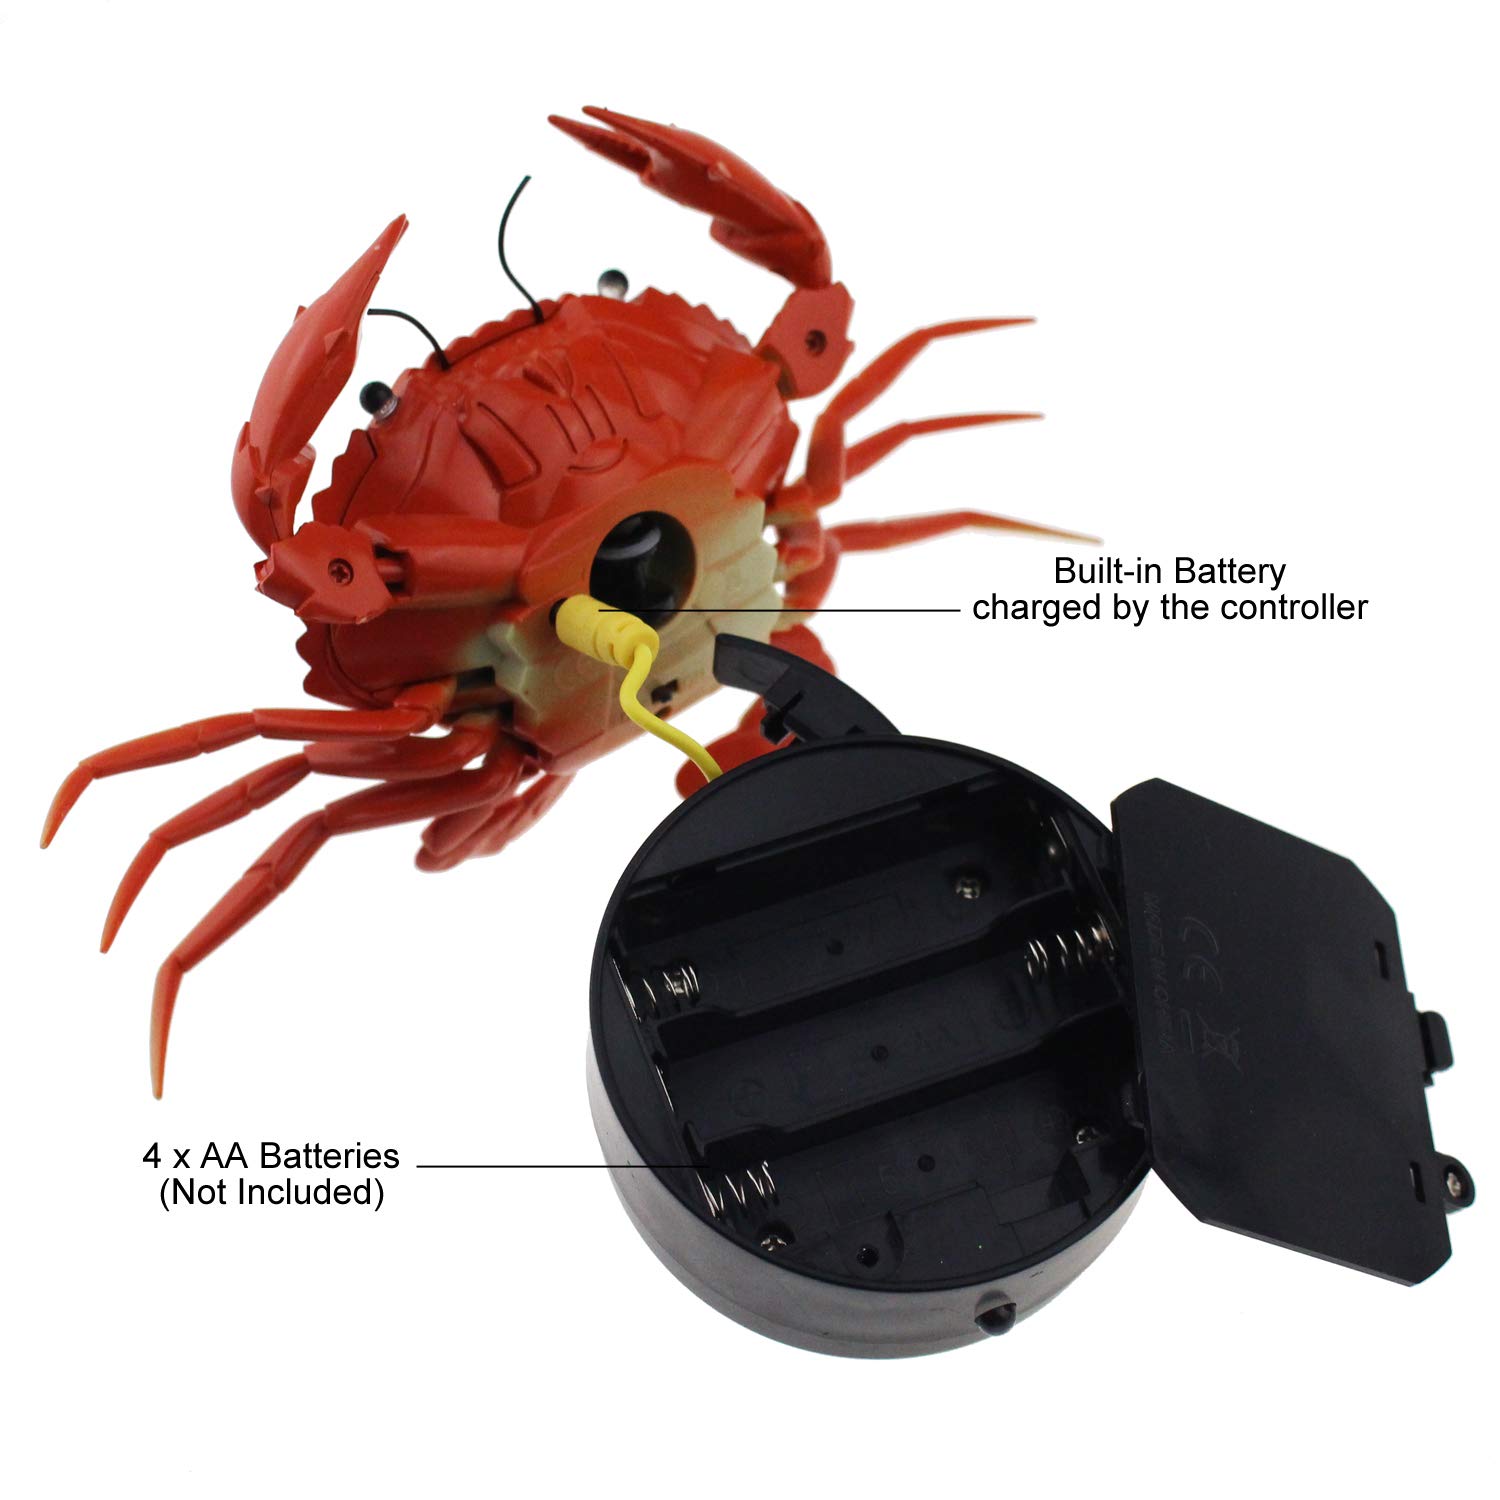 Tipmant RC Crab Animal Toy Remote Control Car Vehicle Electronic Fake Insect for Kids Birthday Gift Christmas Halloween (Red)